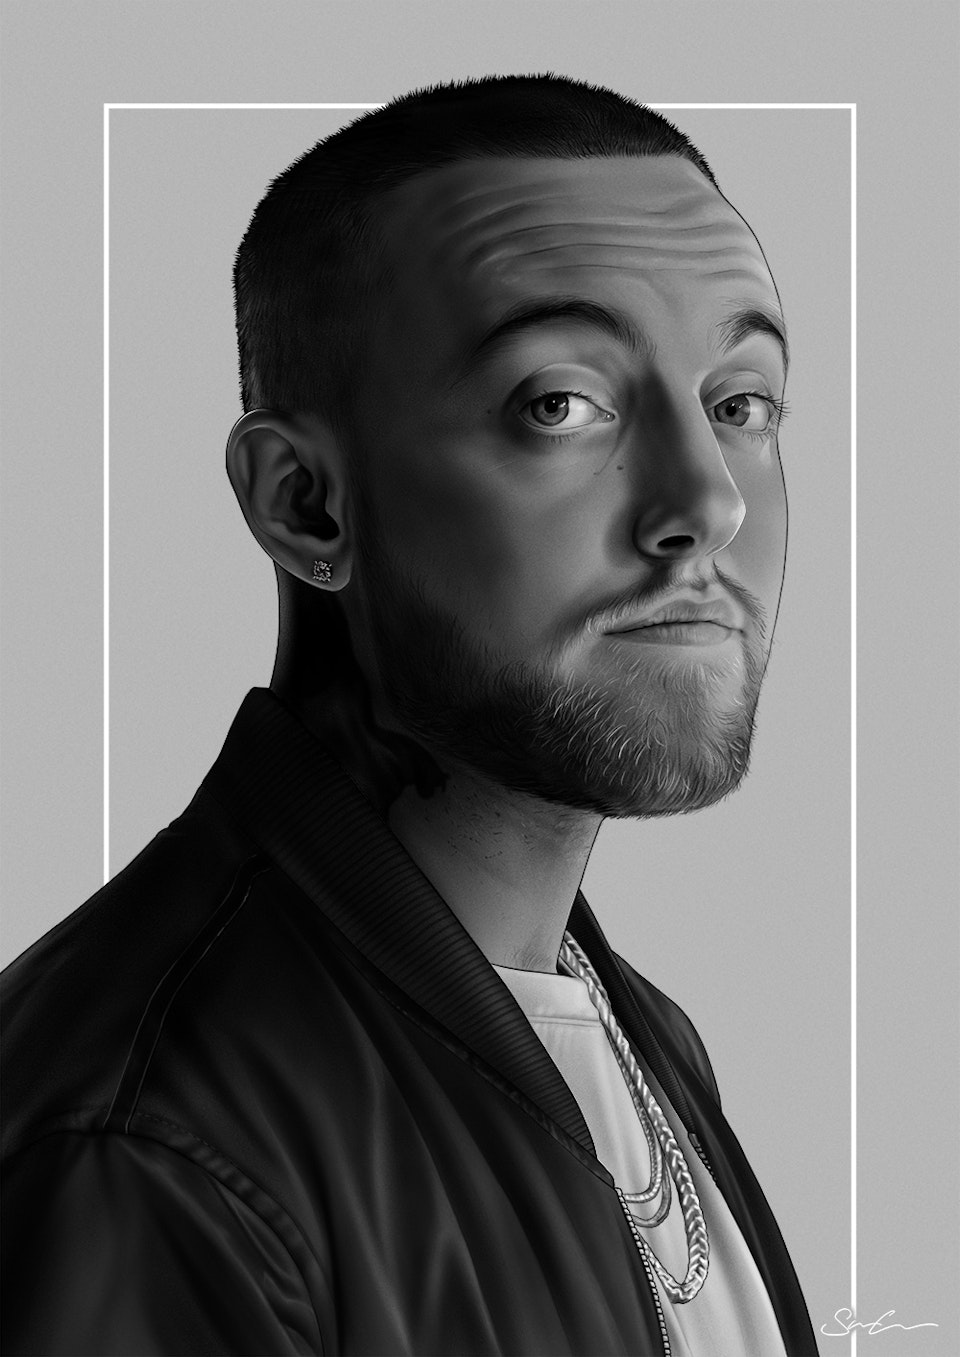 Musician Portraits - Here is the original greyscale portrait, before applying gradient map and other design elements.

Illustrated in Procreate.